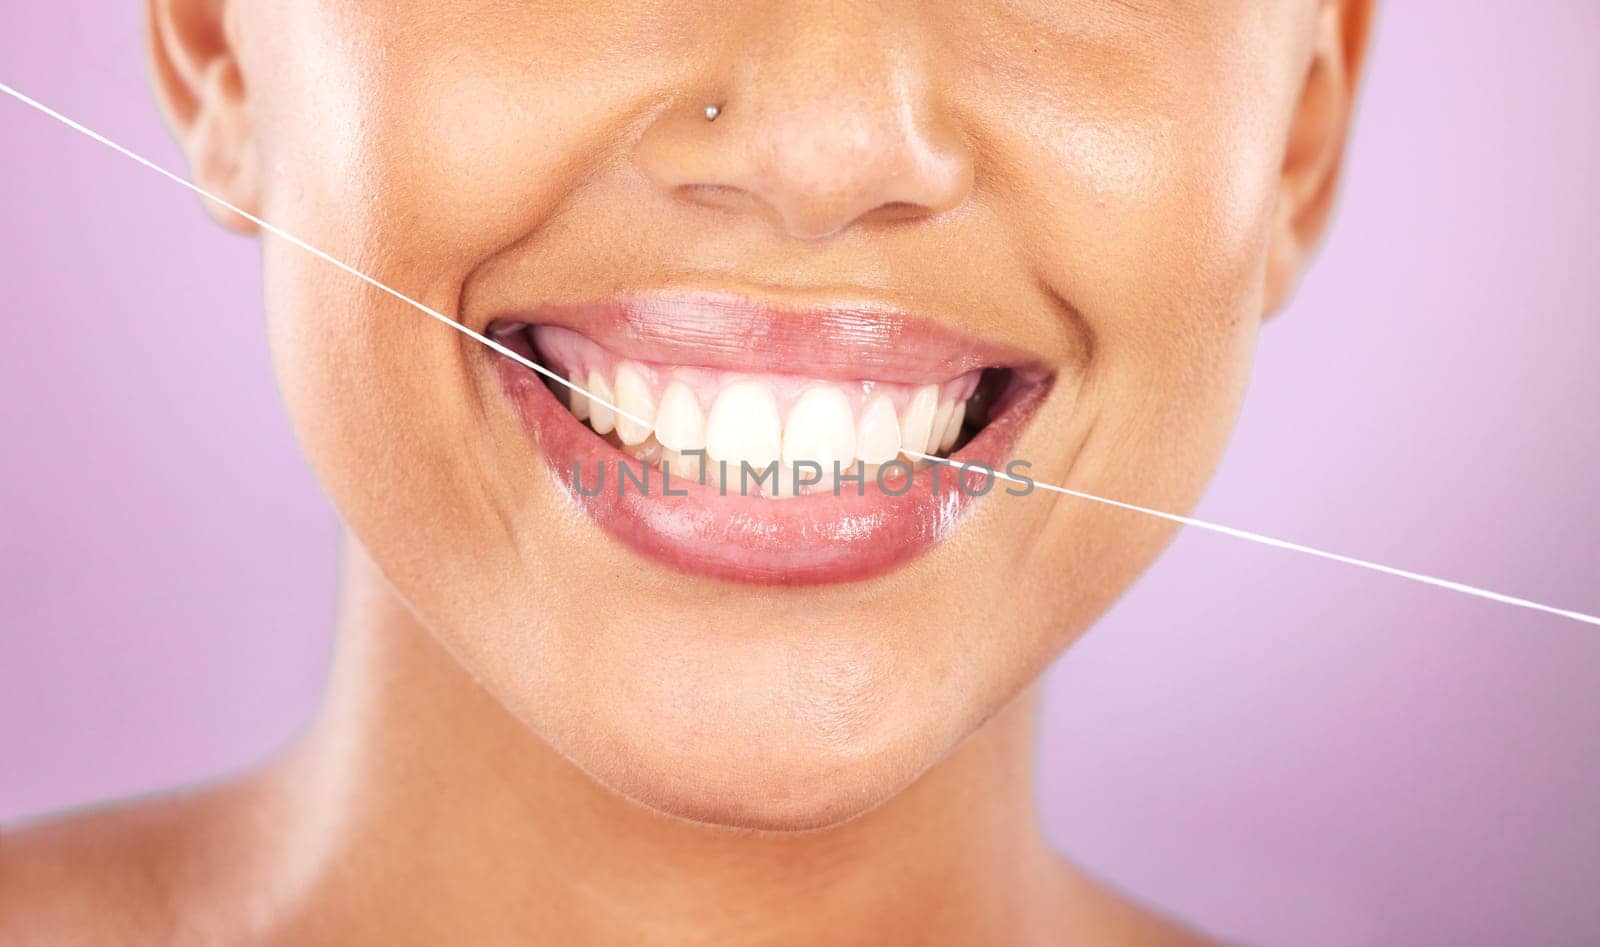 Teeth, dental floss and beauty with woman, face zoom and smile, cosmetic and oral healthcare against purple background. Flossing, fresh breath and health for mouth, teeth whitening with Invisalign